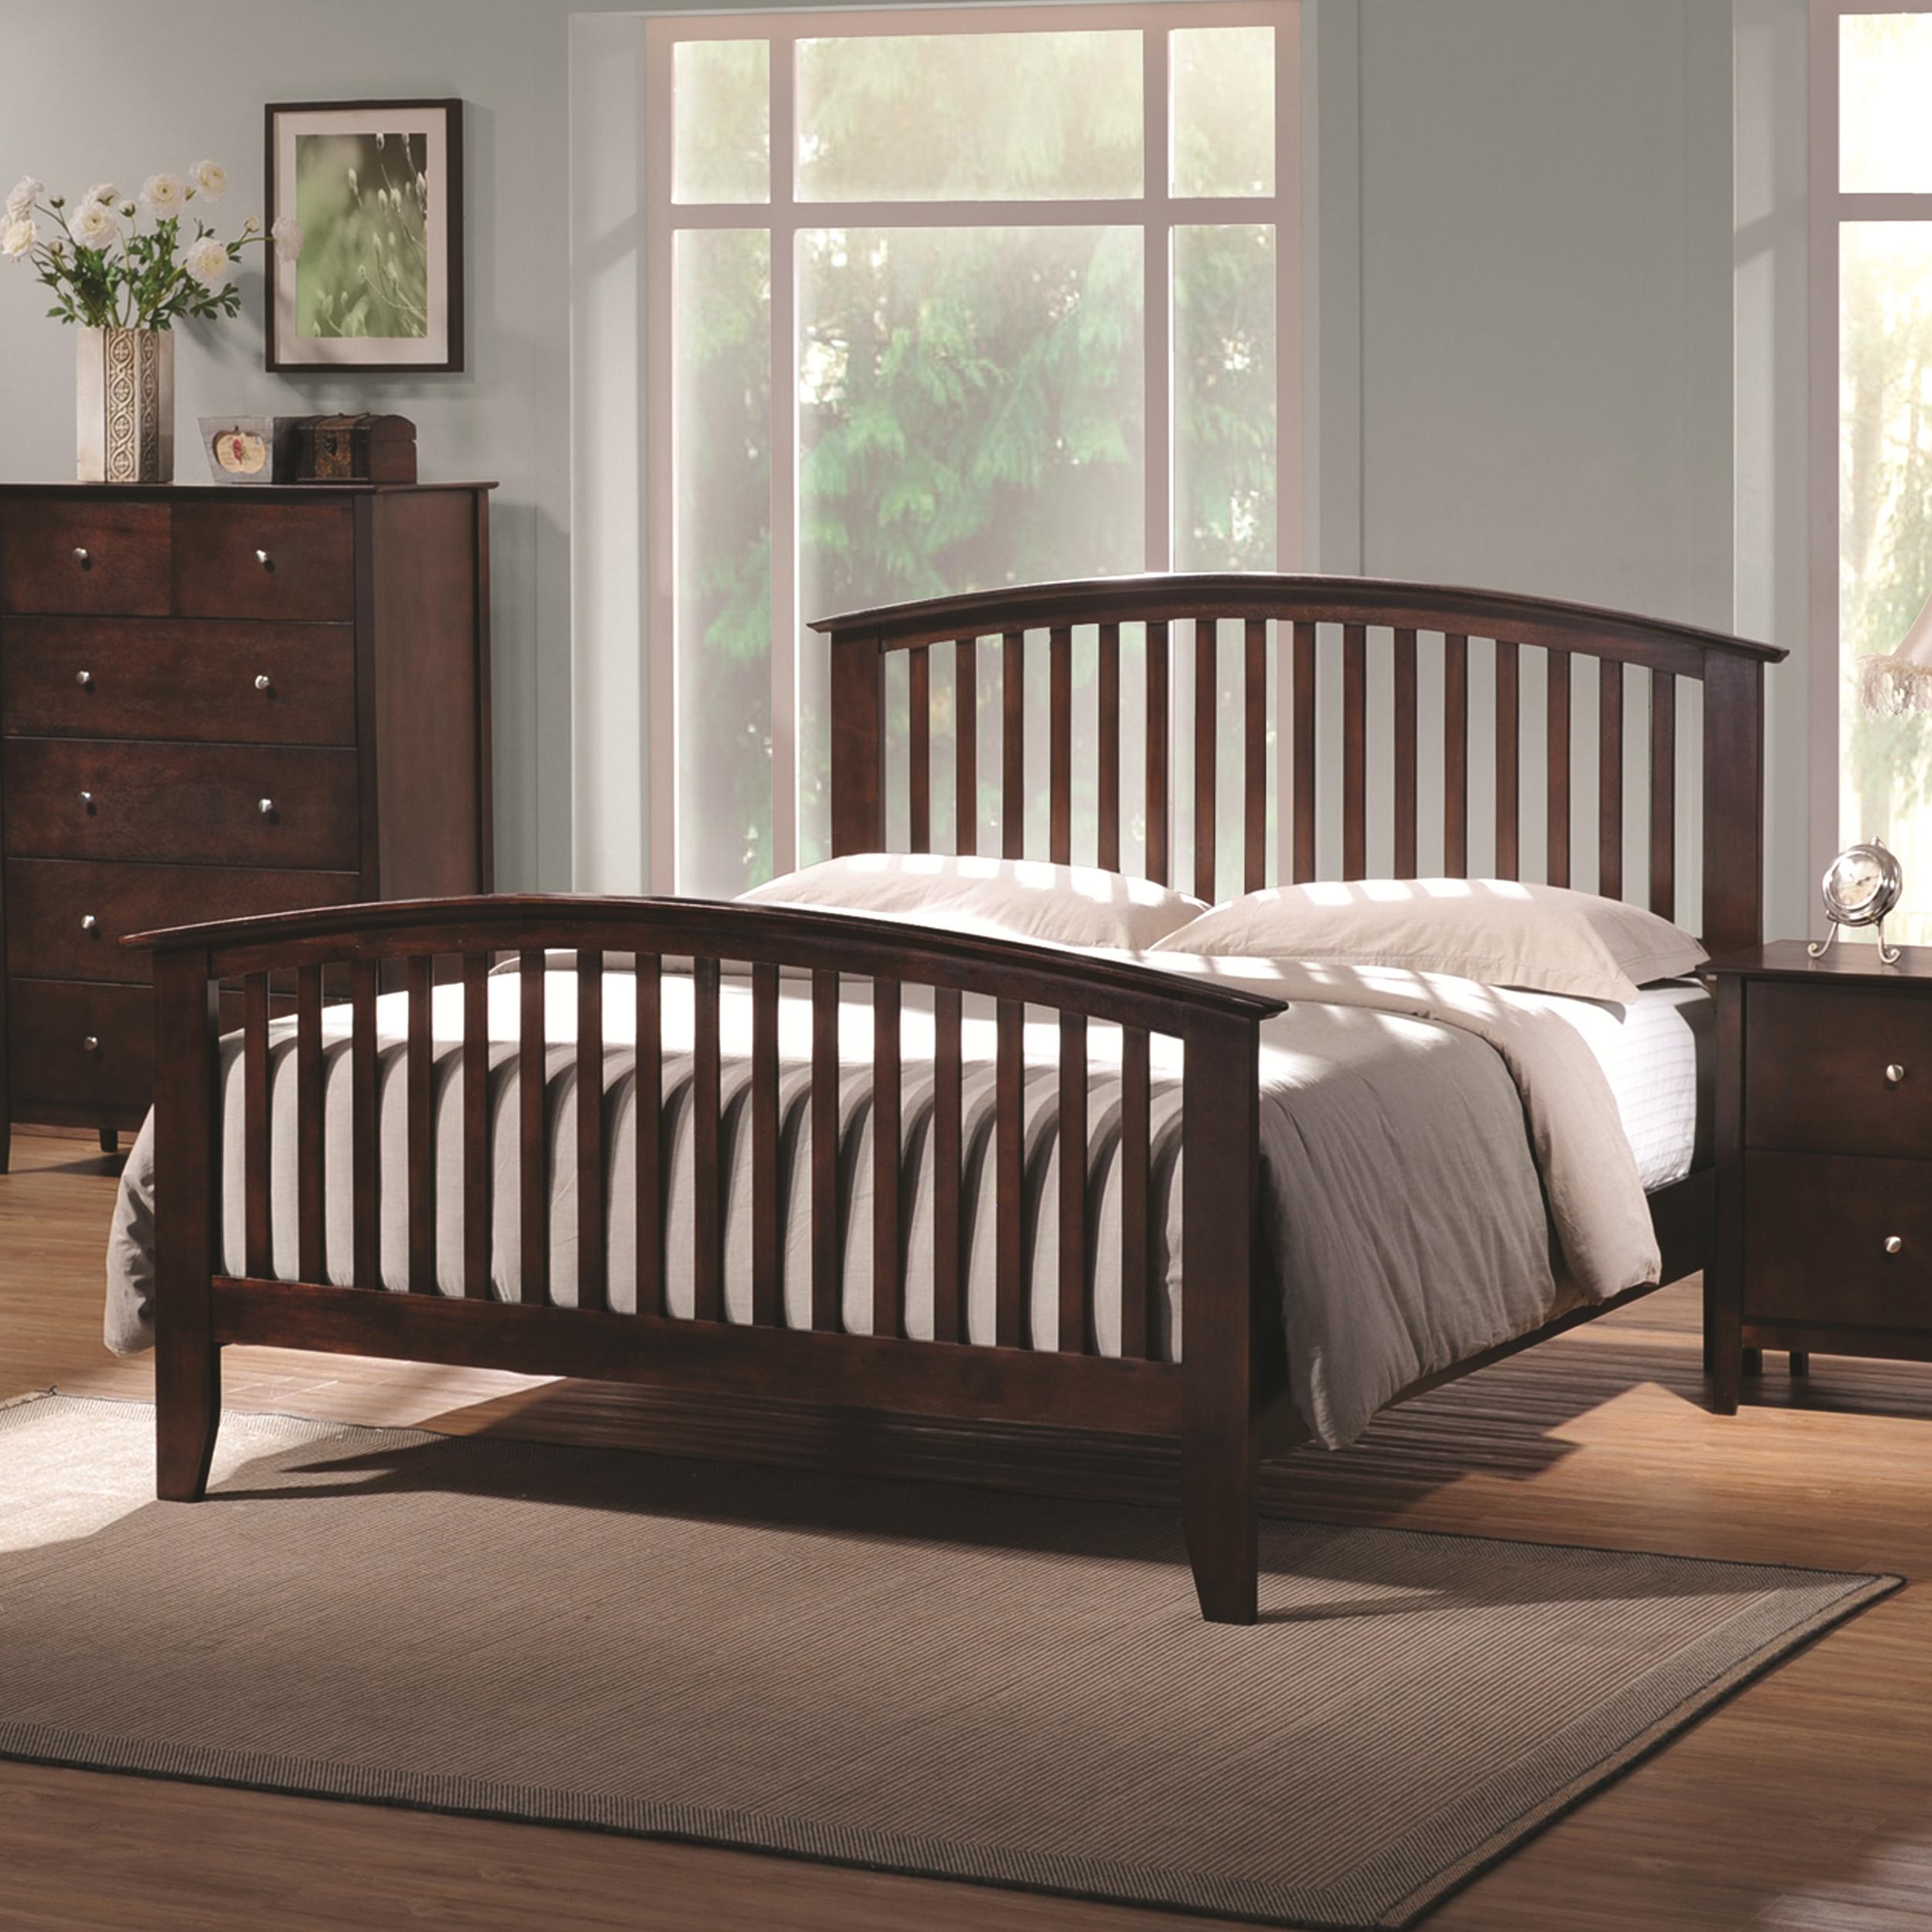 Coaster 202081q Tia Cappuccino Slatted, King Size Bed With Headboard And Footboard Dimensions